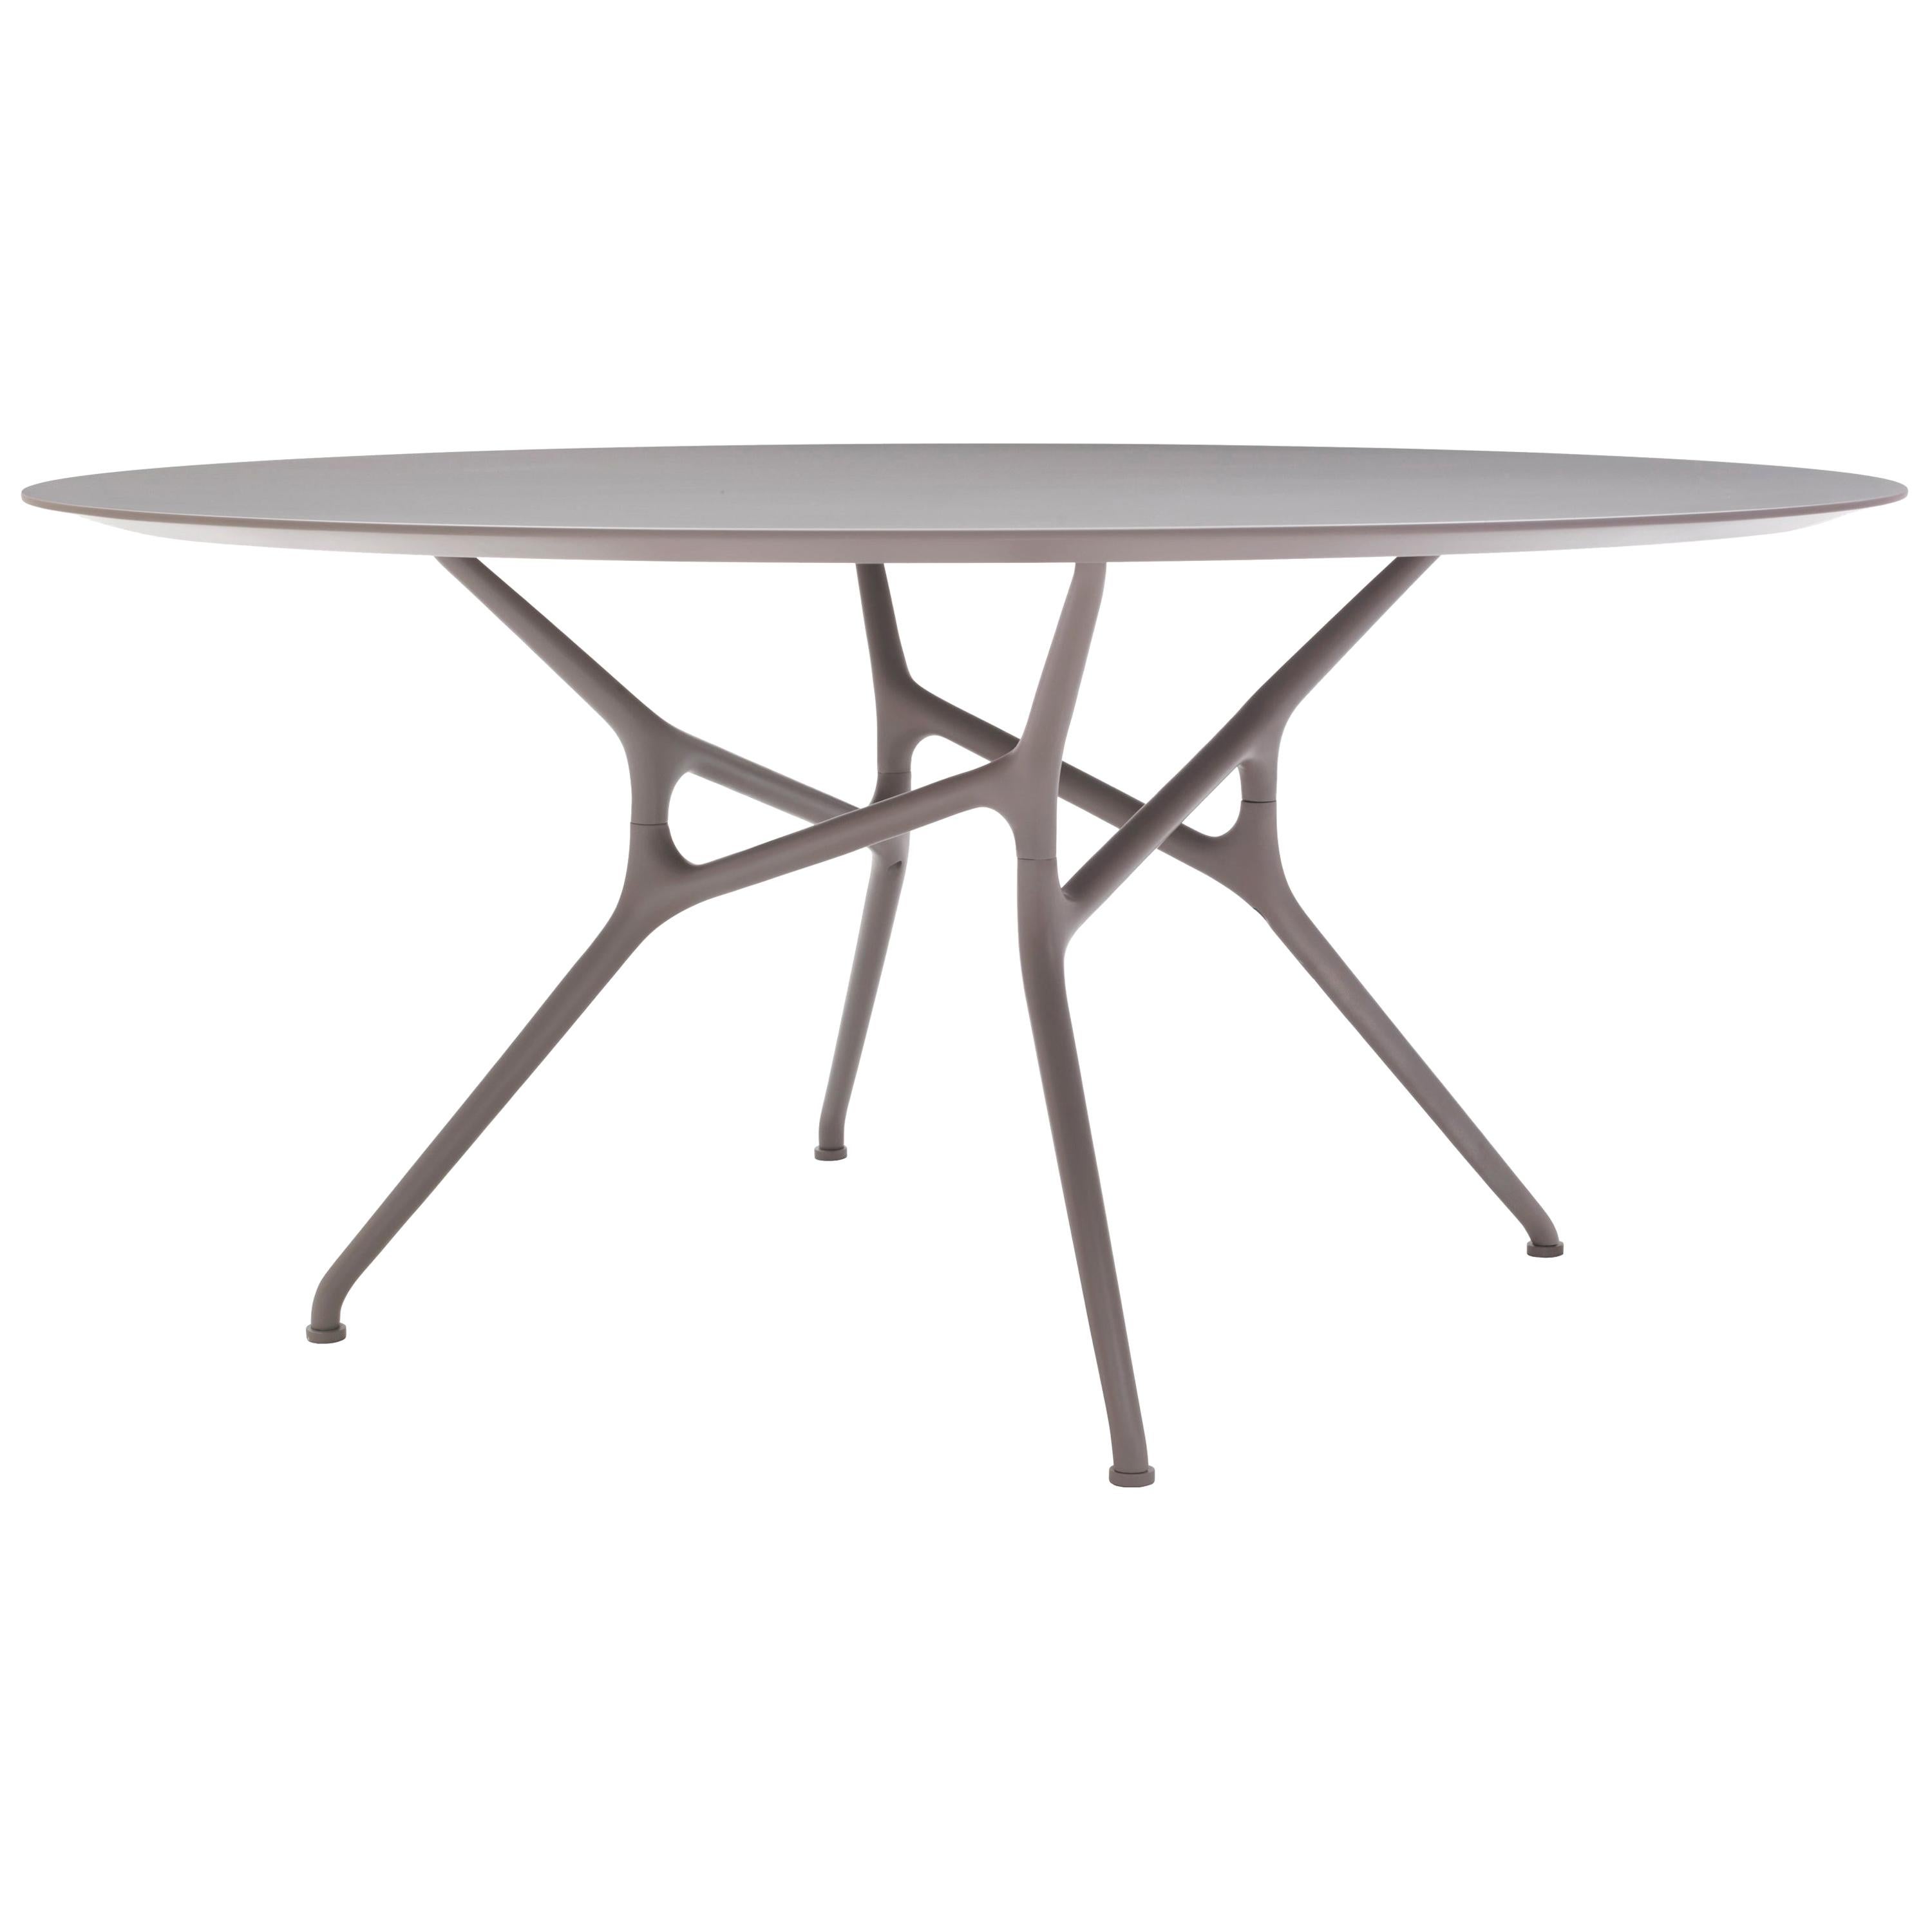 Jakob Wagner Round Branch Table in Mud Lacquered Structure for Cappellini